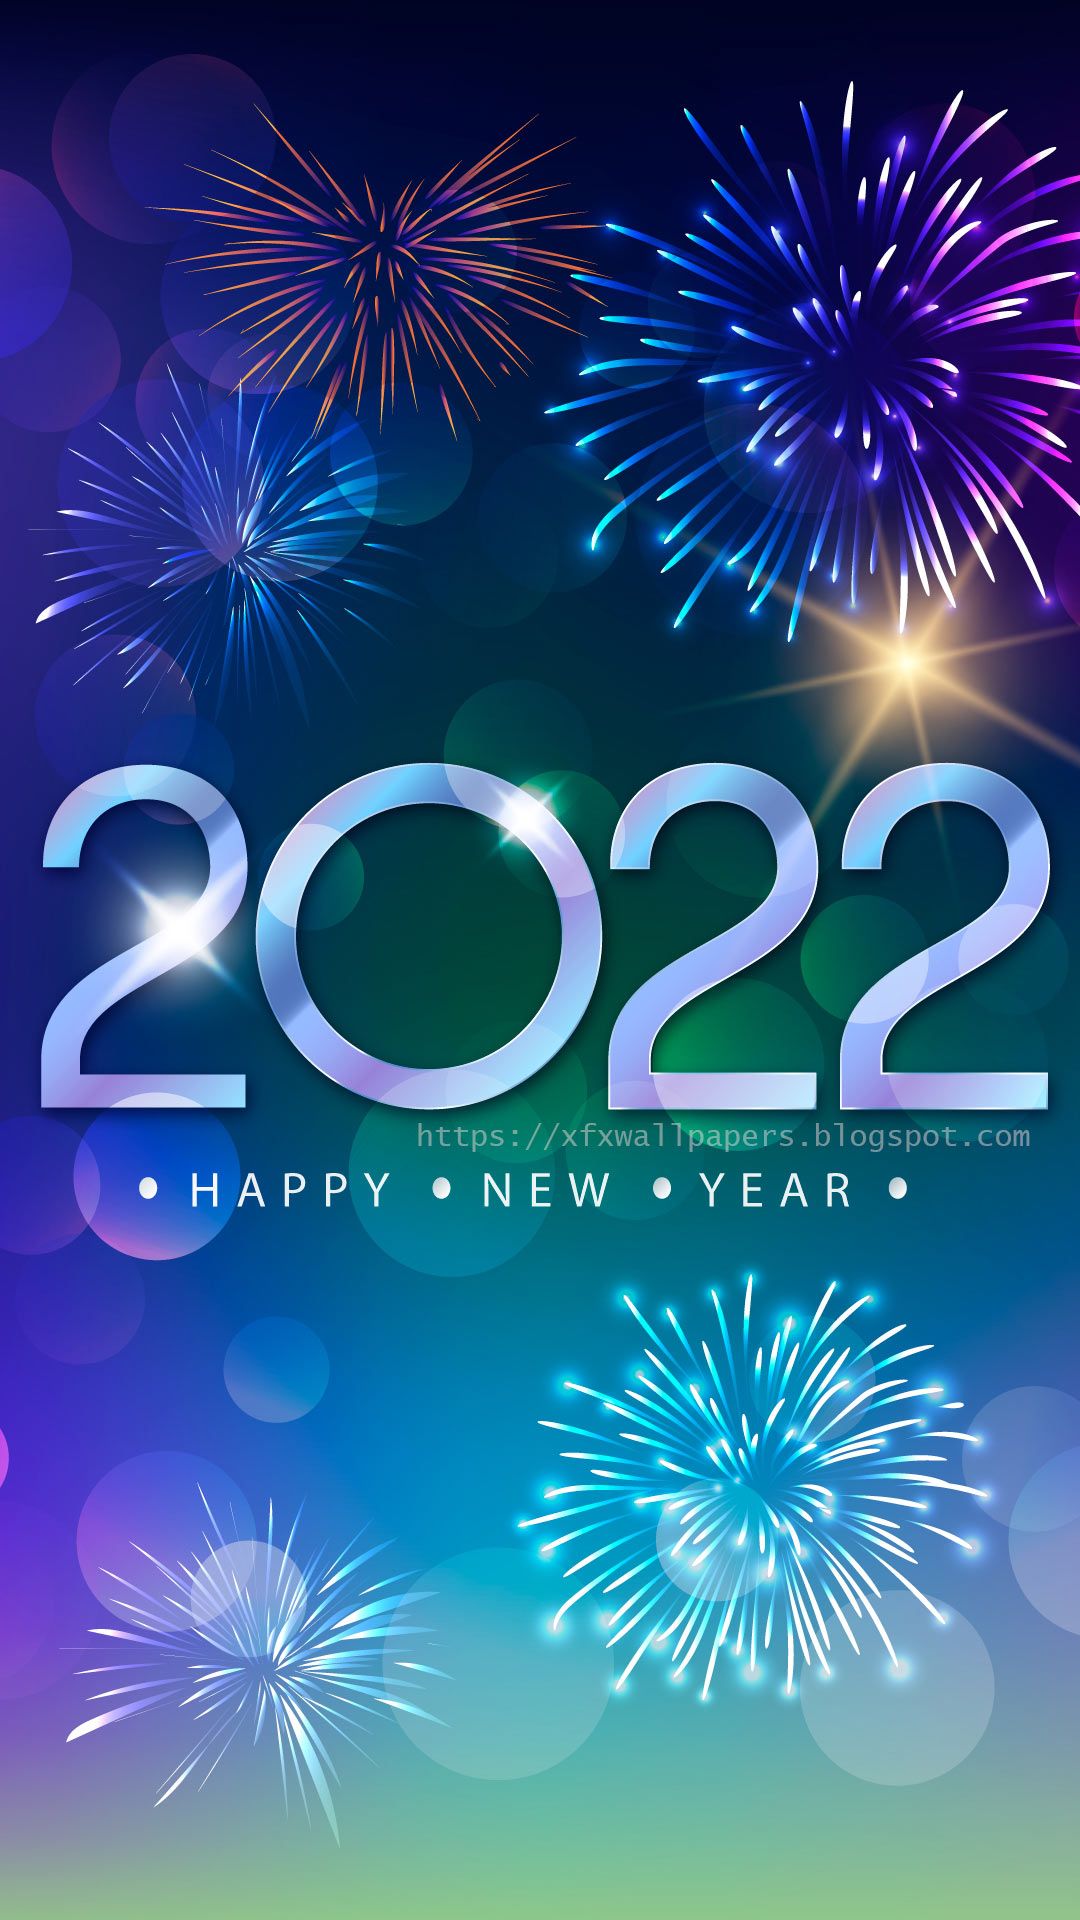 Happy New Year 2022 Wallpapers   Top Best 2022 Happy New Year 1080x1920